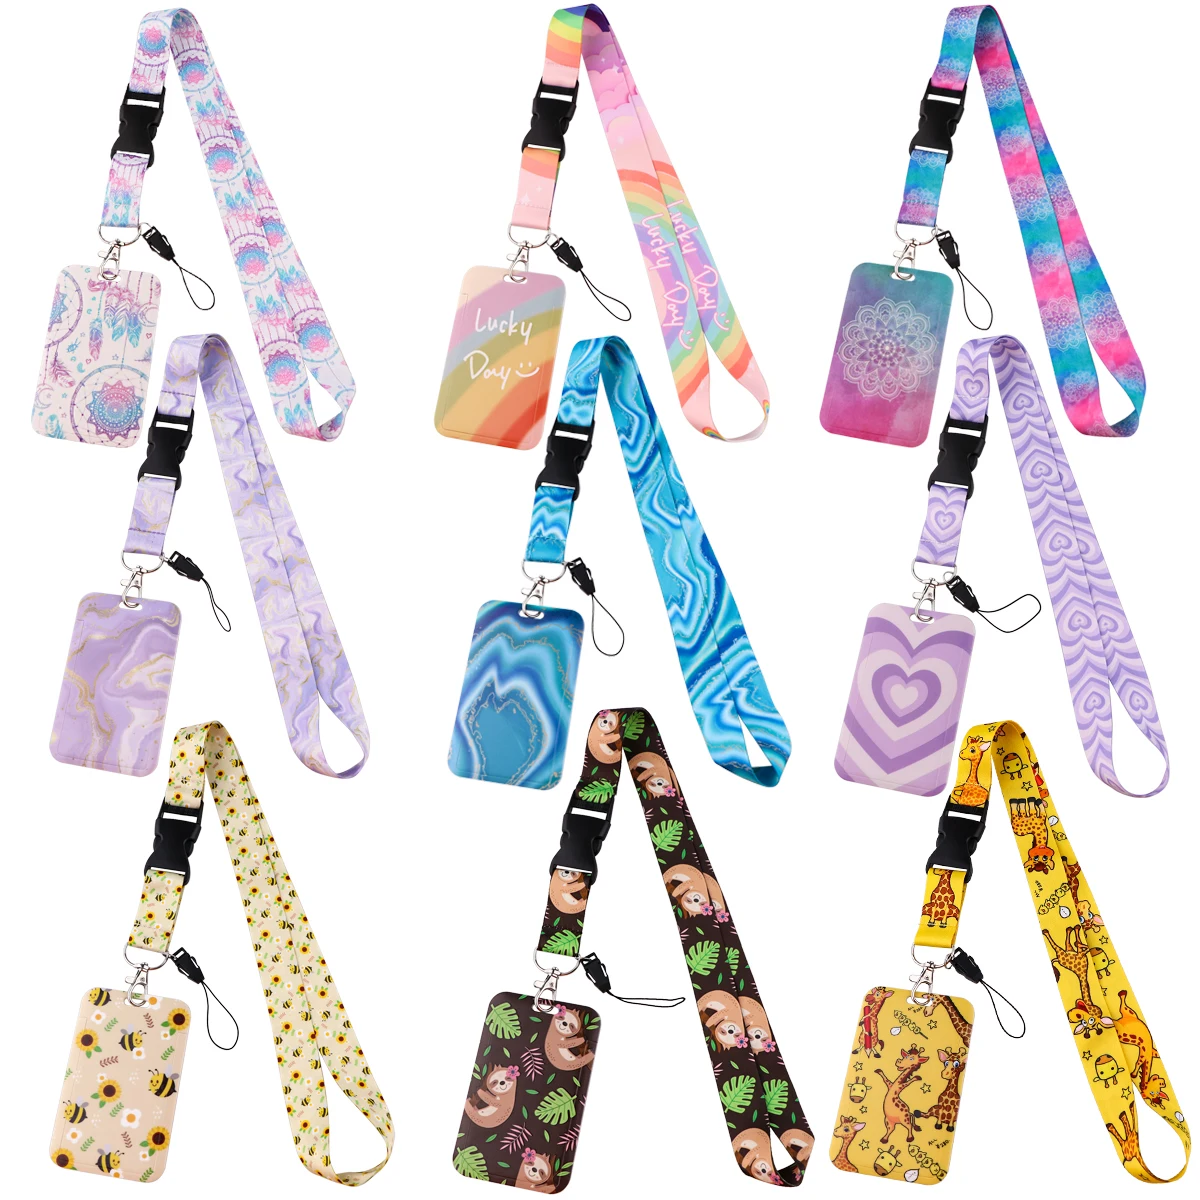 Marble Printing Lanyards for Keys Neck Strap ID Card Gym Cell Phone Straps USB Badge Holder DIY Hang Rope Neckband Accessories er2041 anime lanyard for keys keychains id card cover badge holder phone key lanyard neck straps key rings keychain accessories